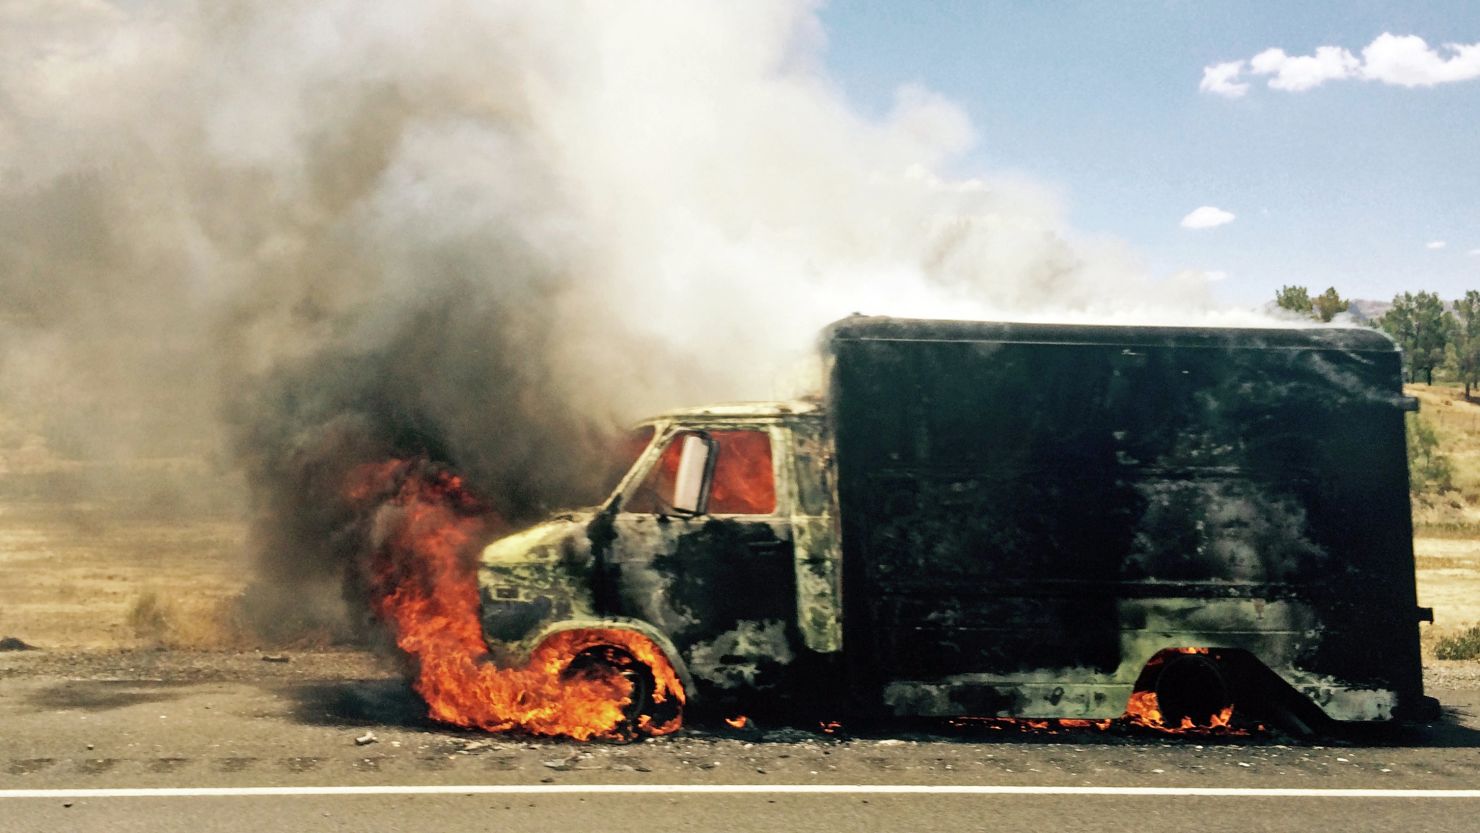 Jay Rutherford of the band Los Colognes posted a photo of a van that California authorities say was transporting fireworks.
